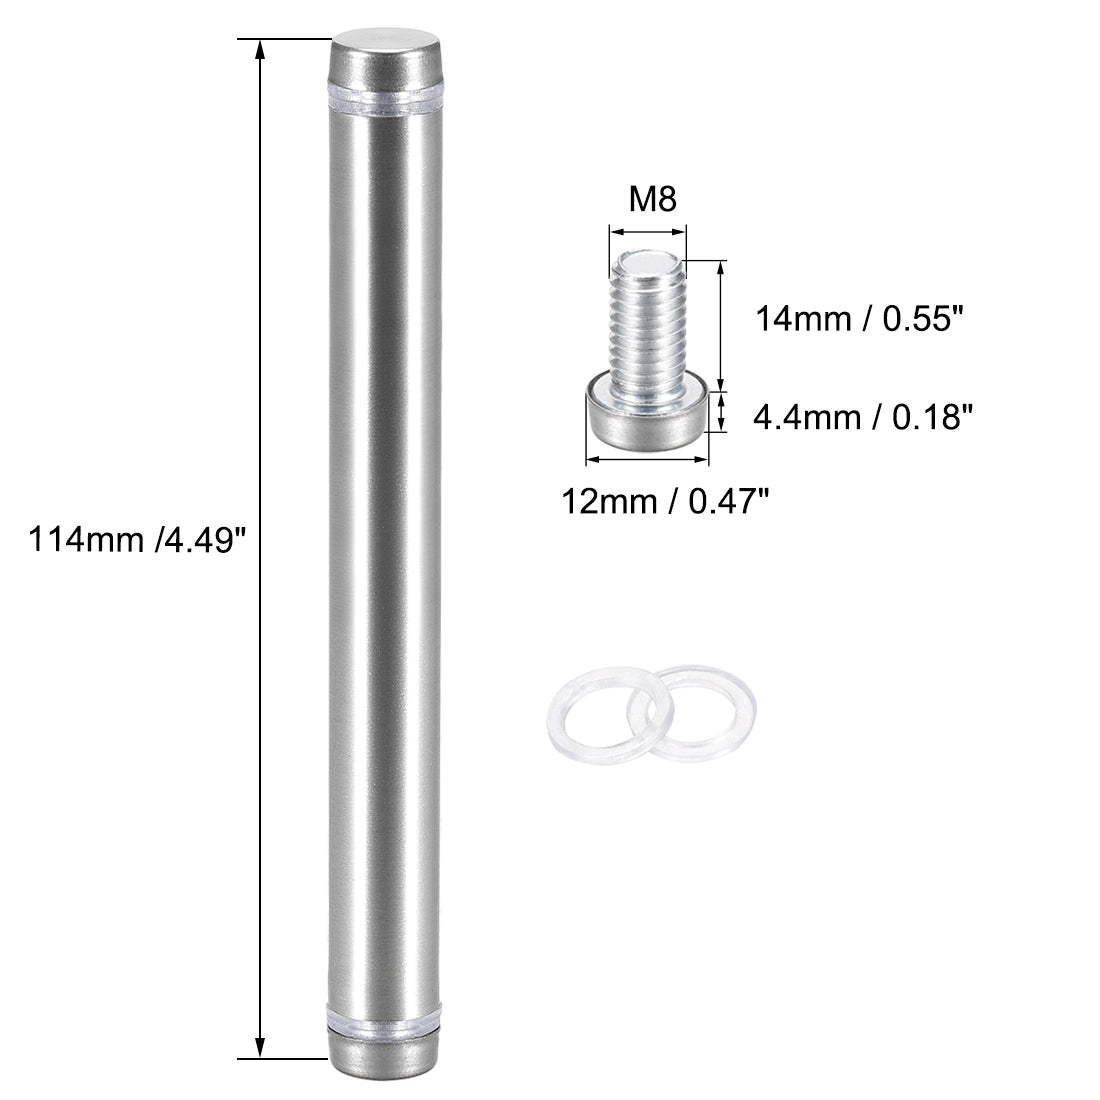 uxcell Uxcell Glass Standoff Double Head Stainless Steel Standoff Holder 12mm x 114mm 8 Pcs